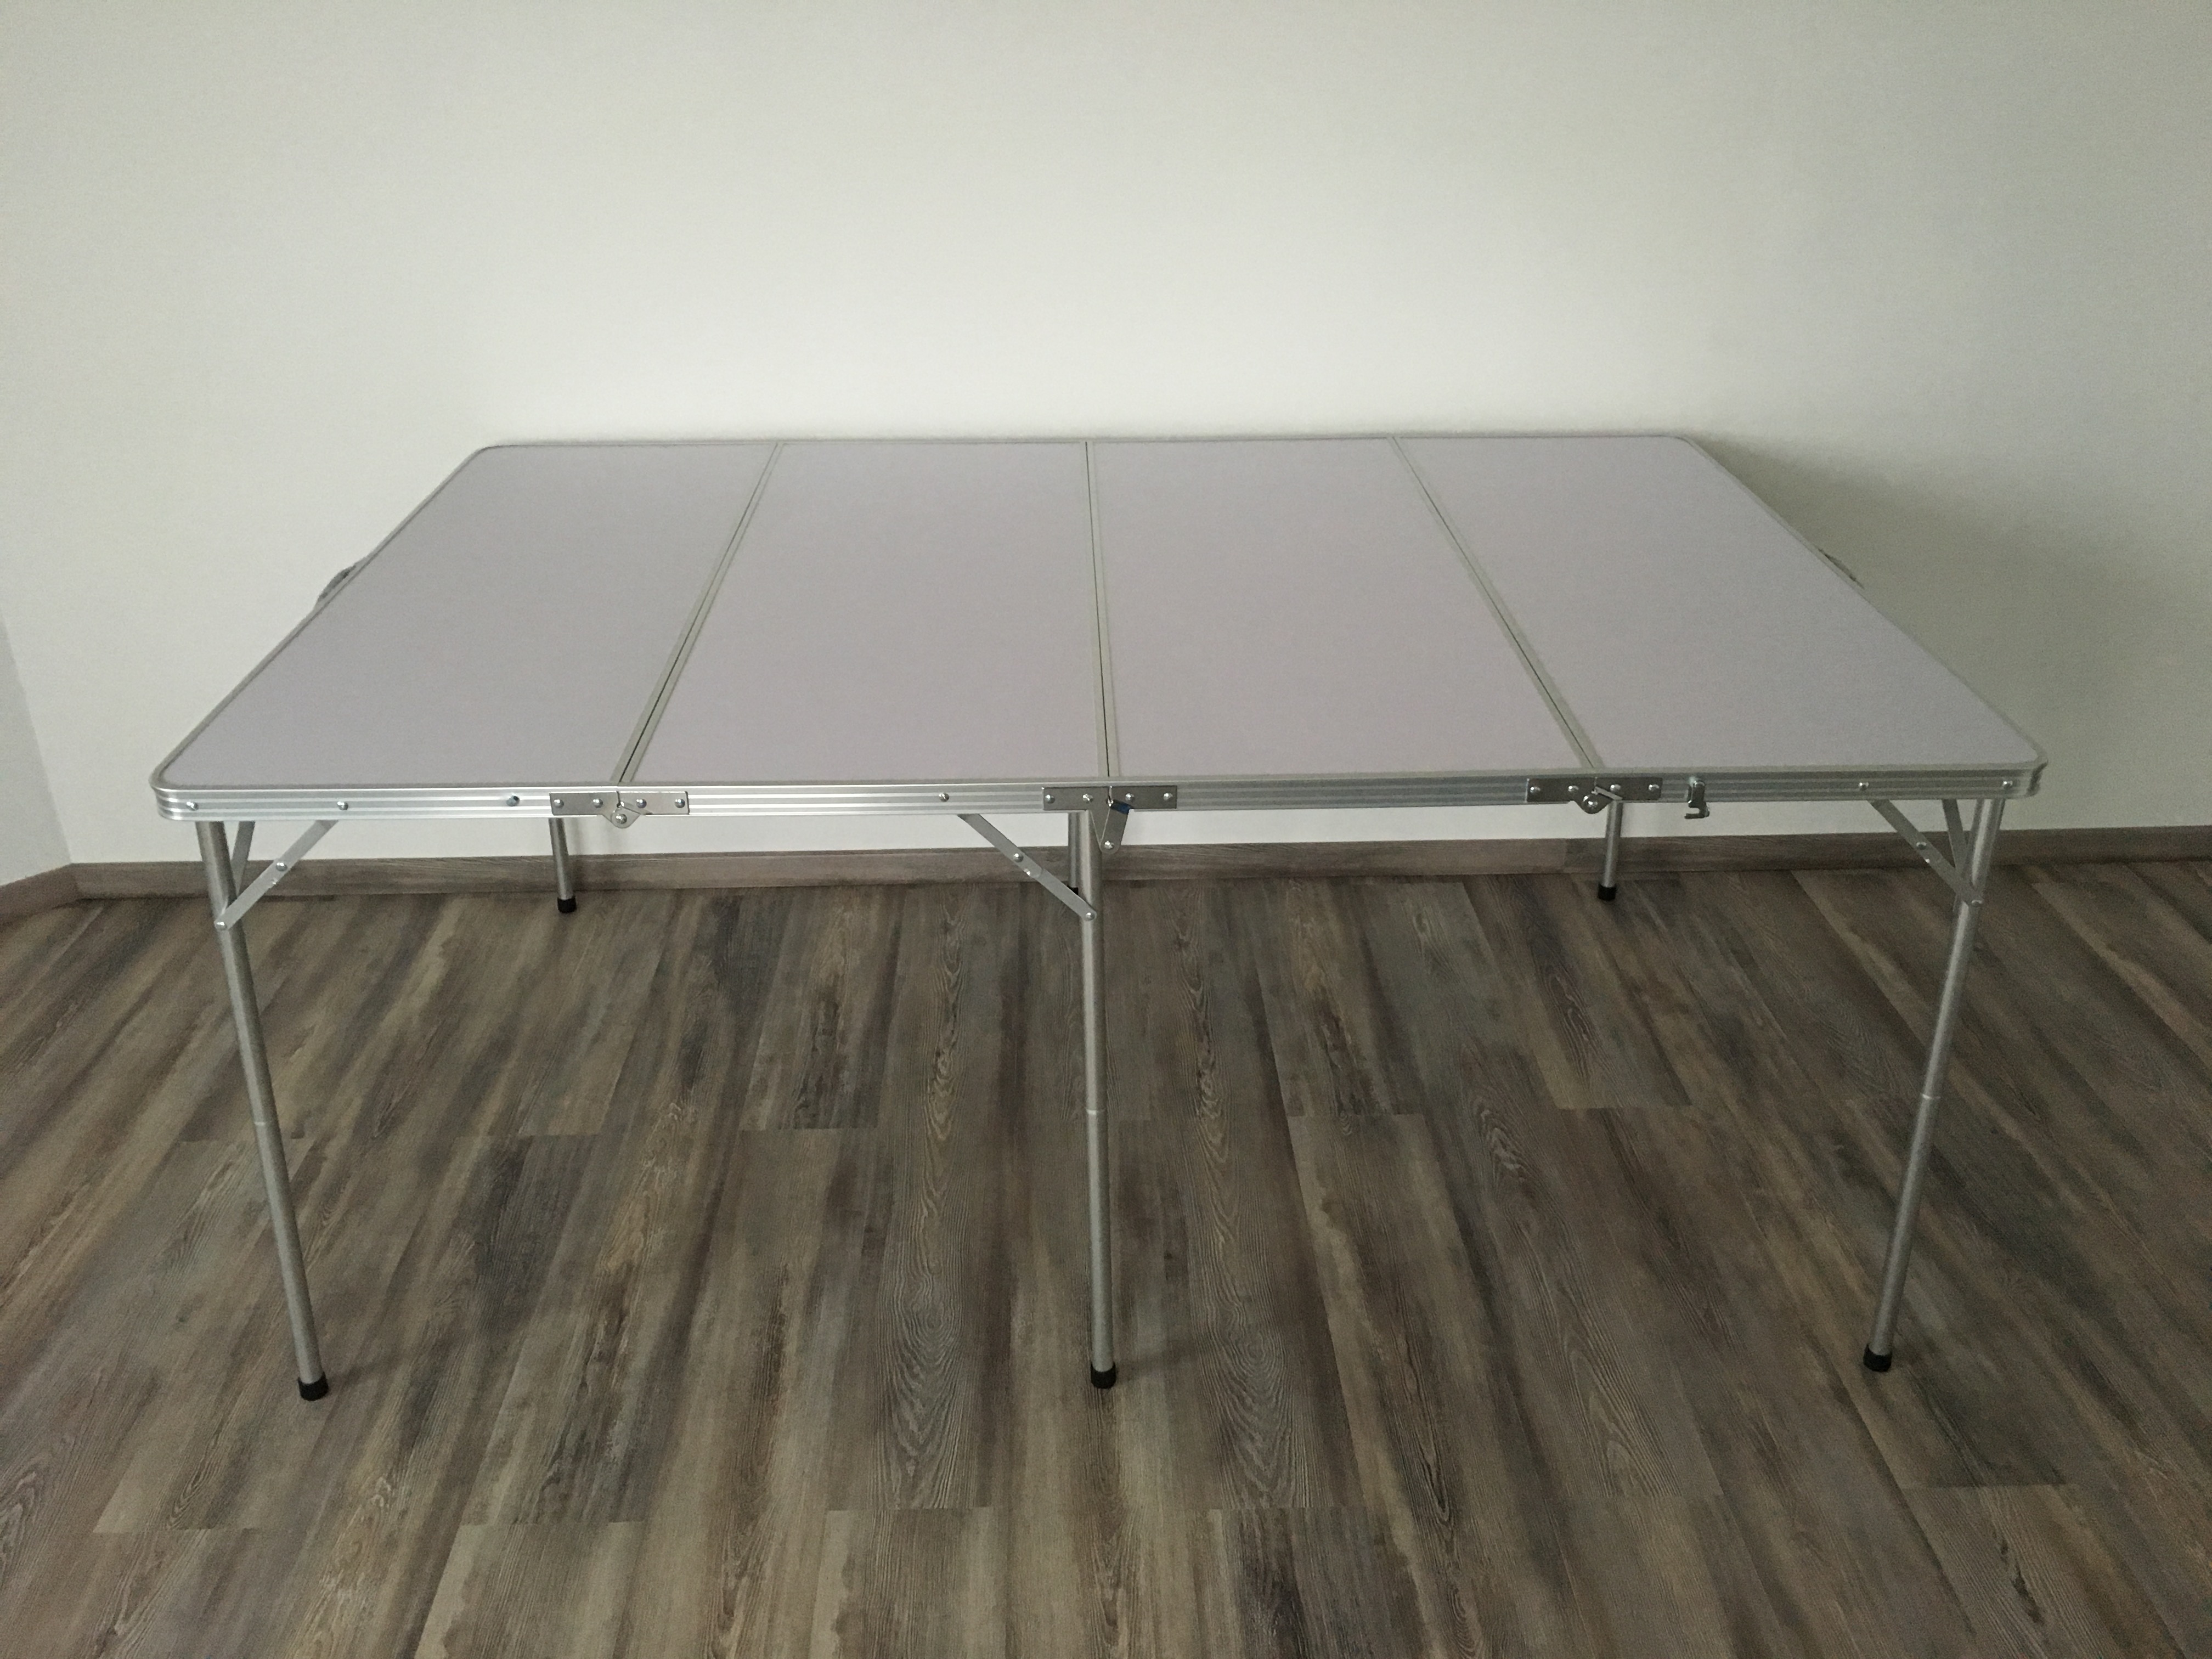 6’x4′ portable folding GAMING TABLE in STOCK NOW !!!